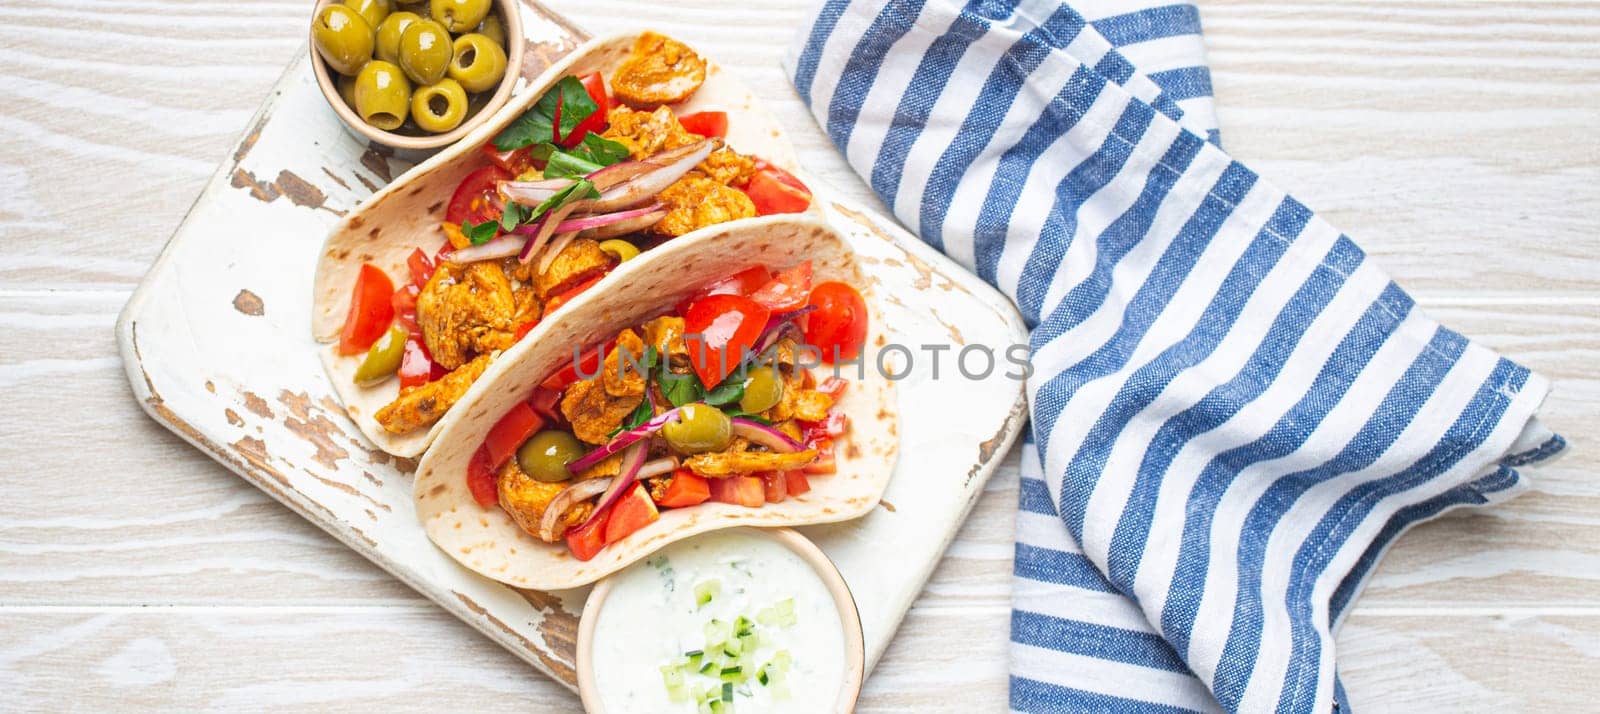 Traditional Greek Dish Gyros: Pita bread Wraps with vegetables, meat, herbs, olives on rustic wooden cutting board with Tzatziki sauce, olive oil top view on white wooden summer background. by its_al_dente